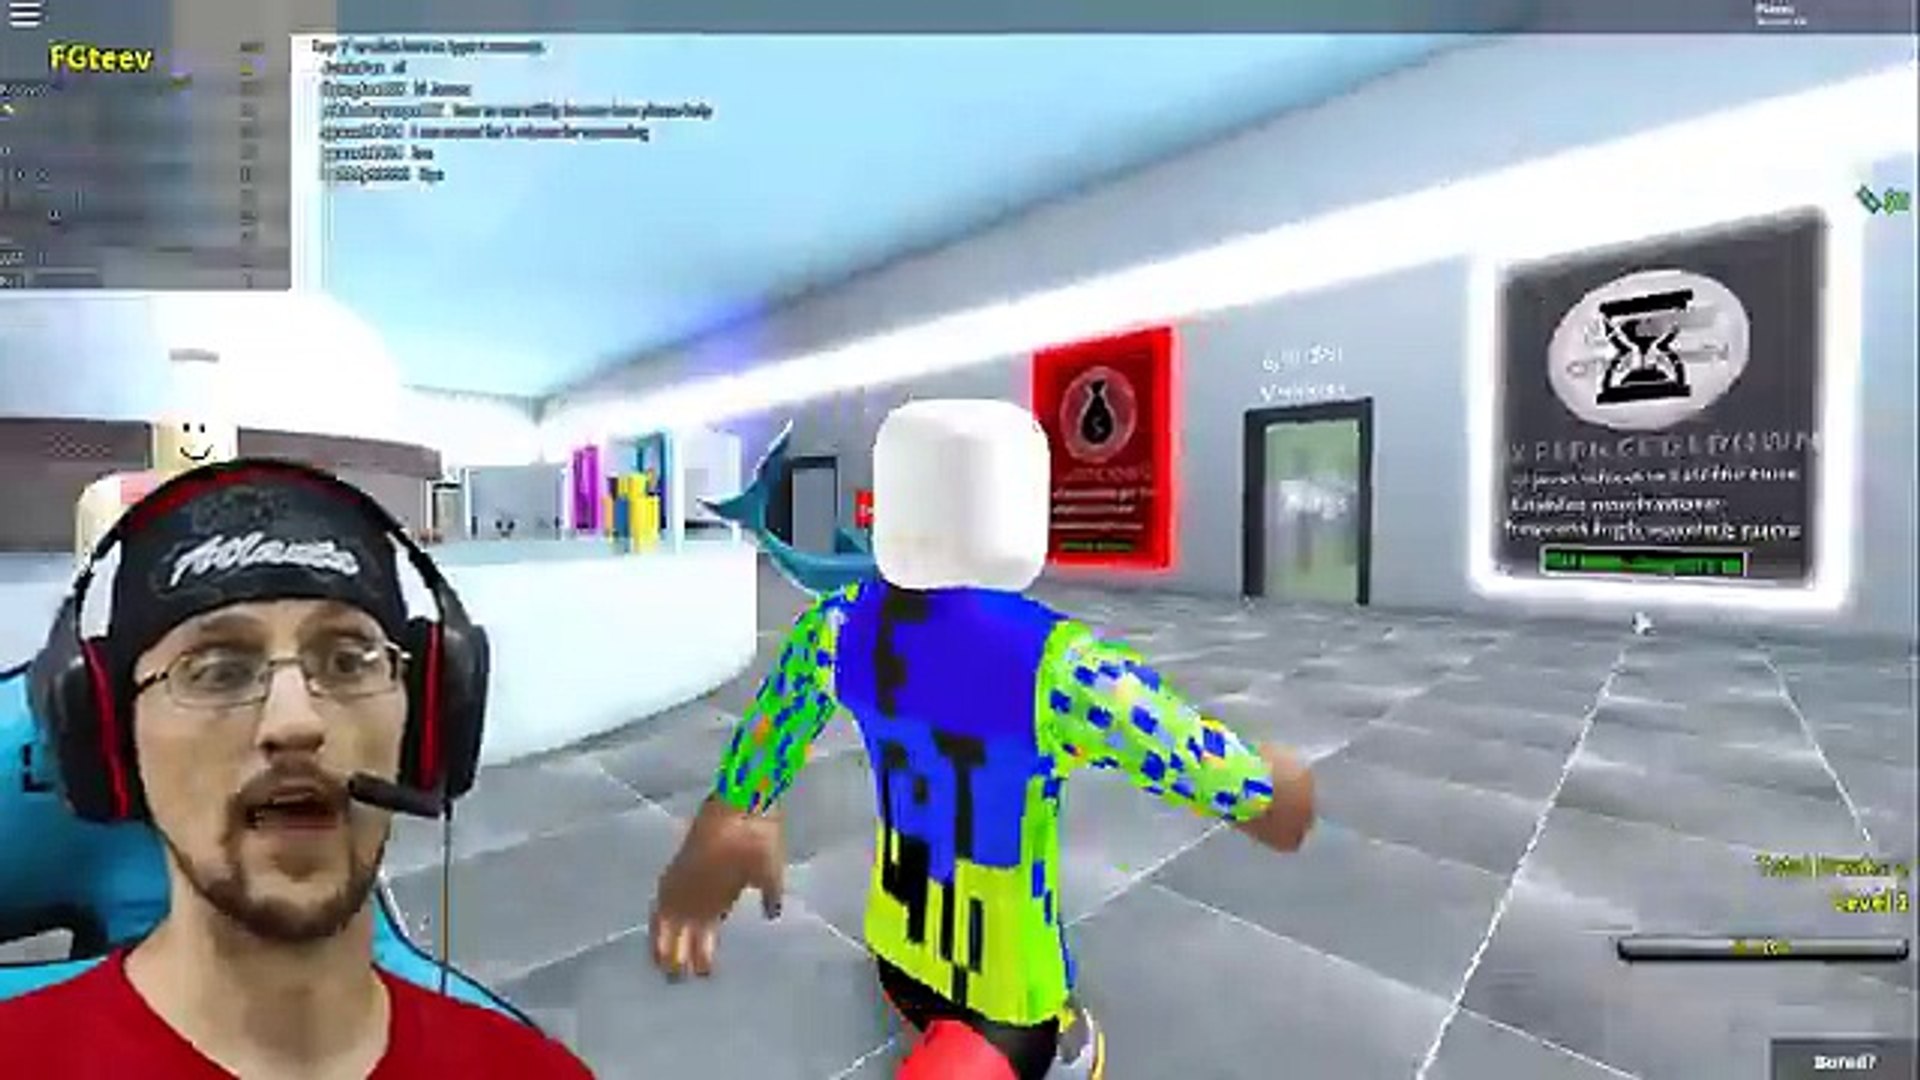 fgteev duddy and chase playing roblox